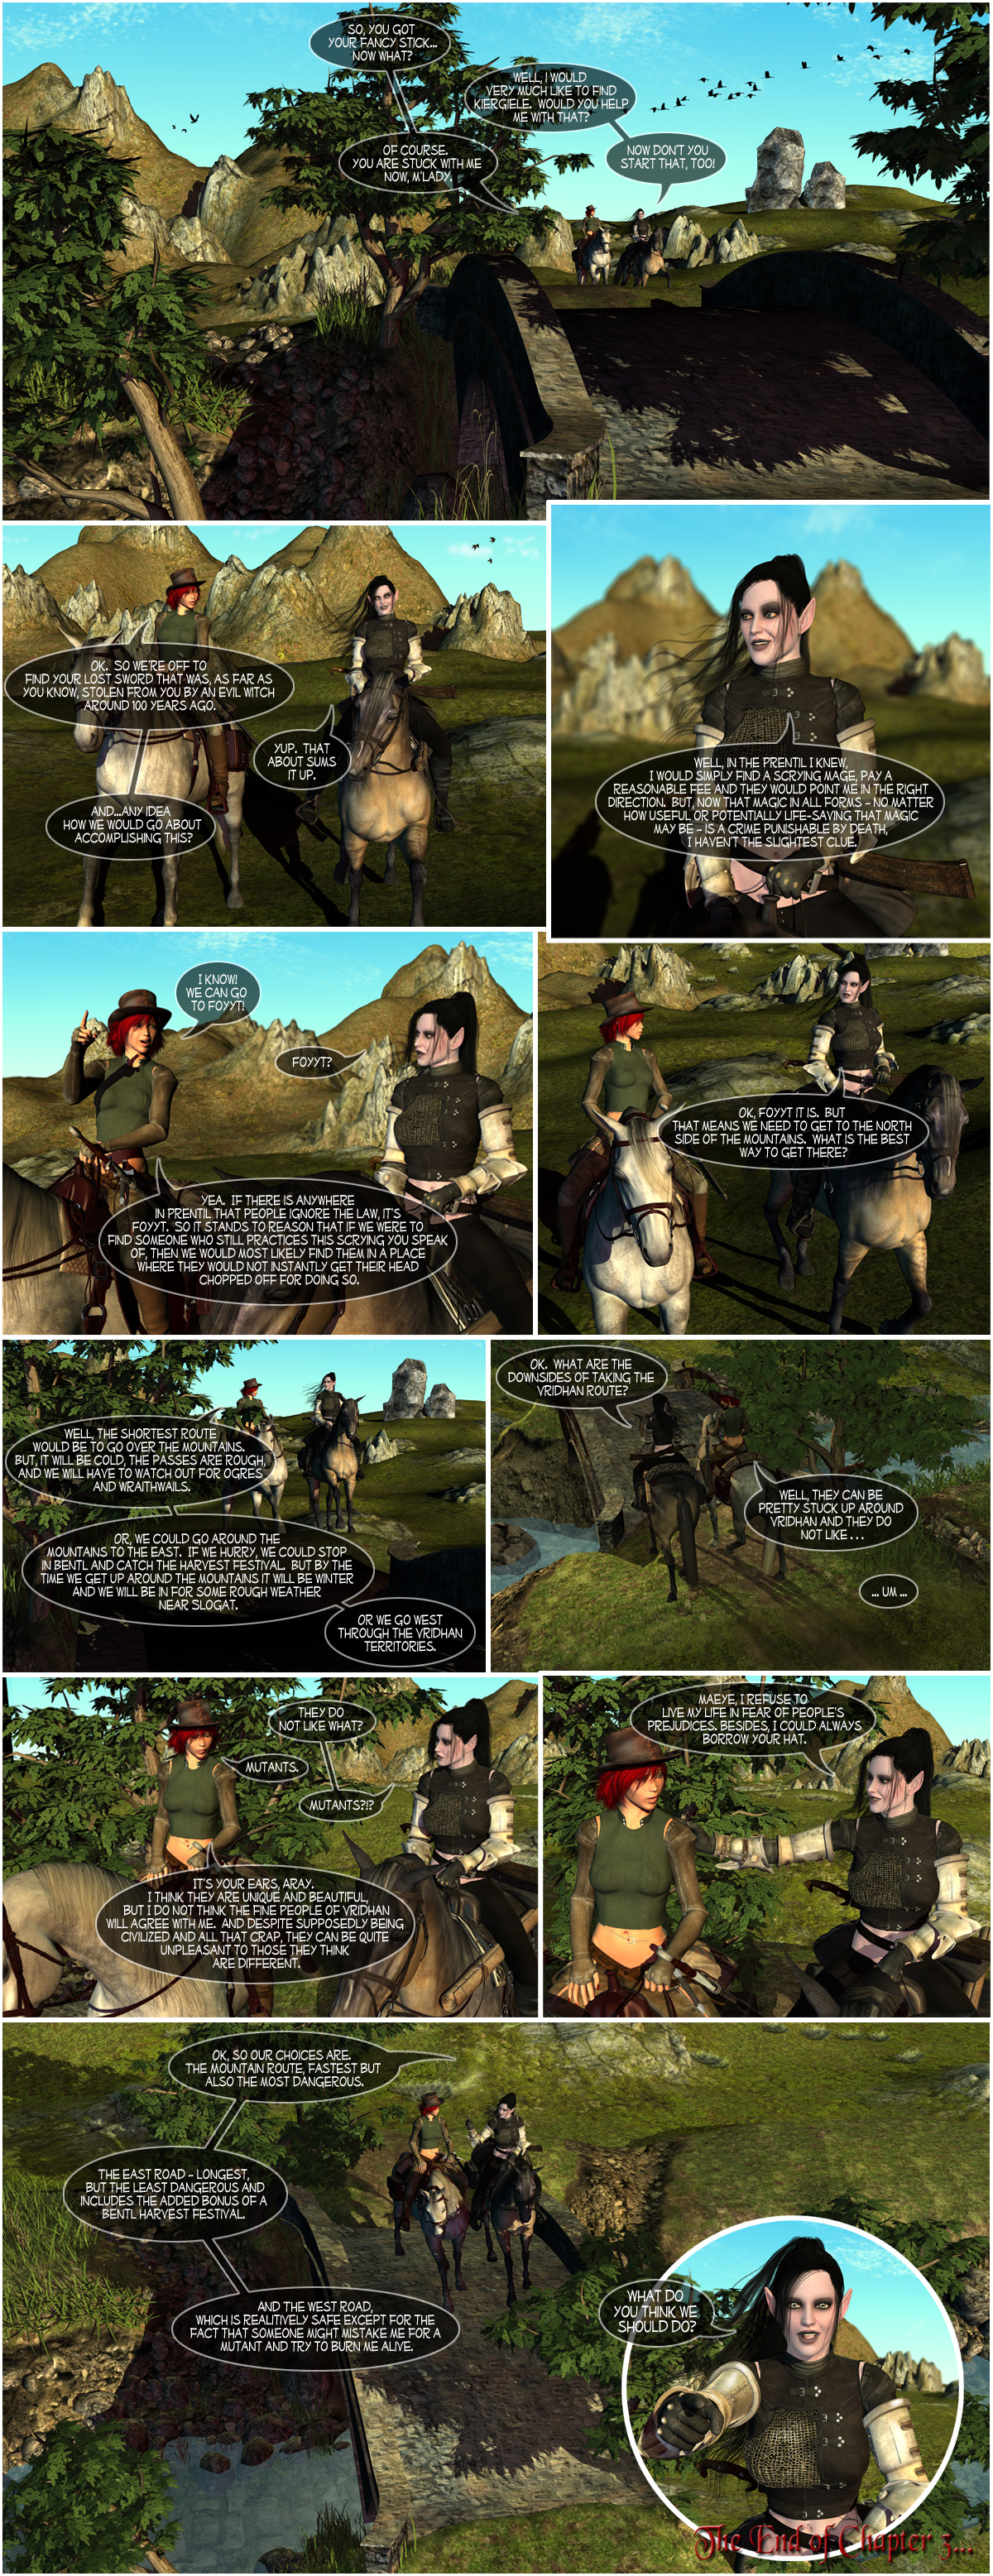 Book 1, Chapter 3, Page 22